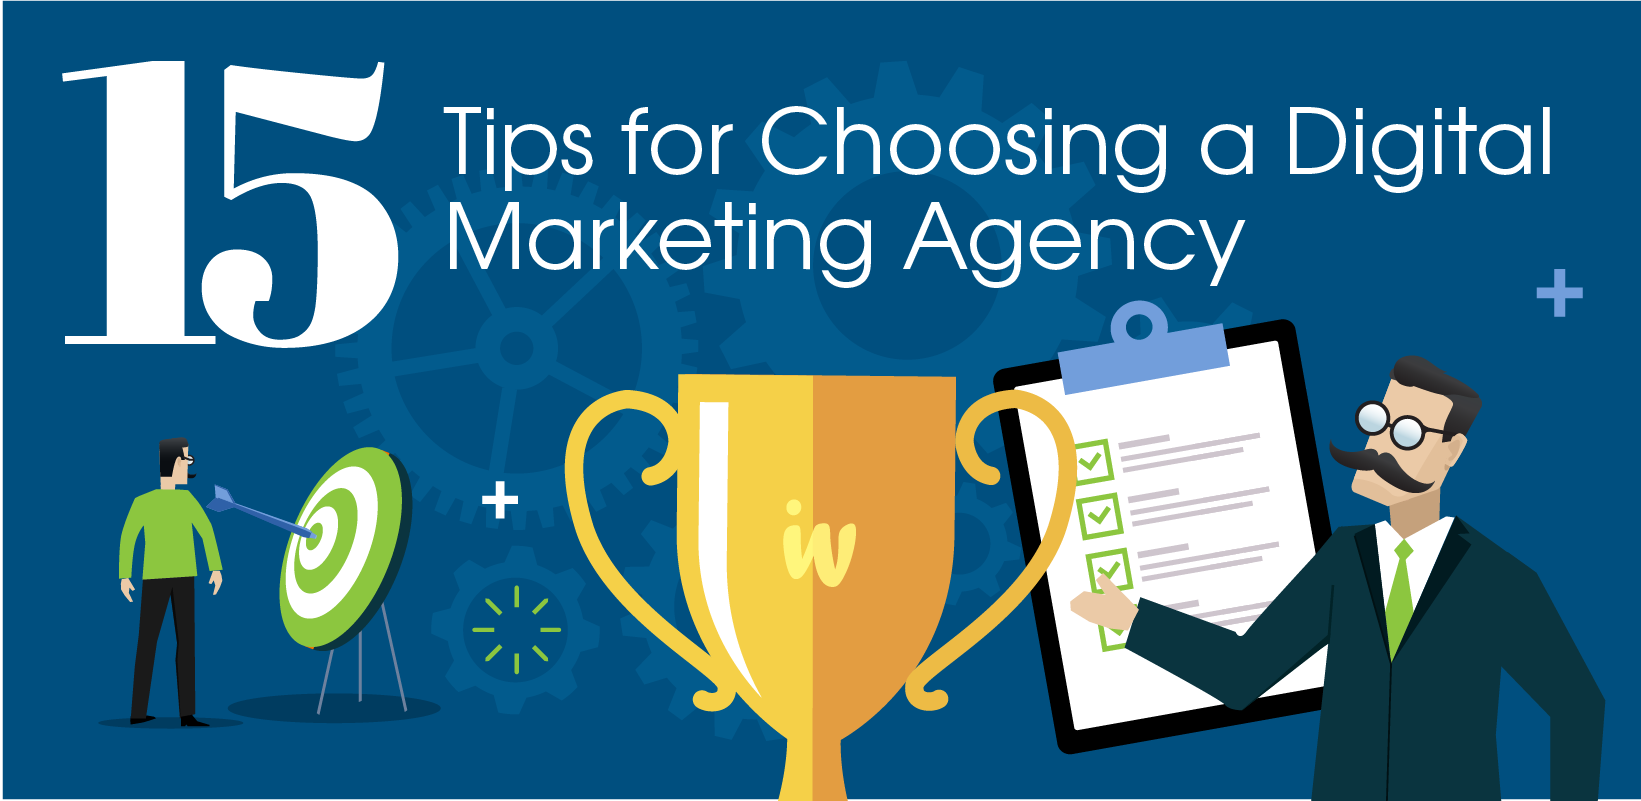 15 Things to consider when choosing a digital marketing agency for your business Banner Image